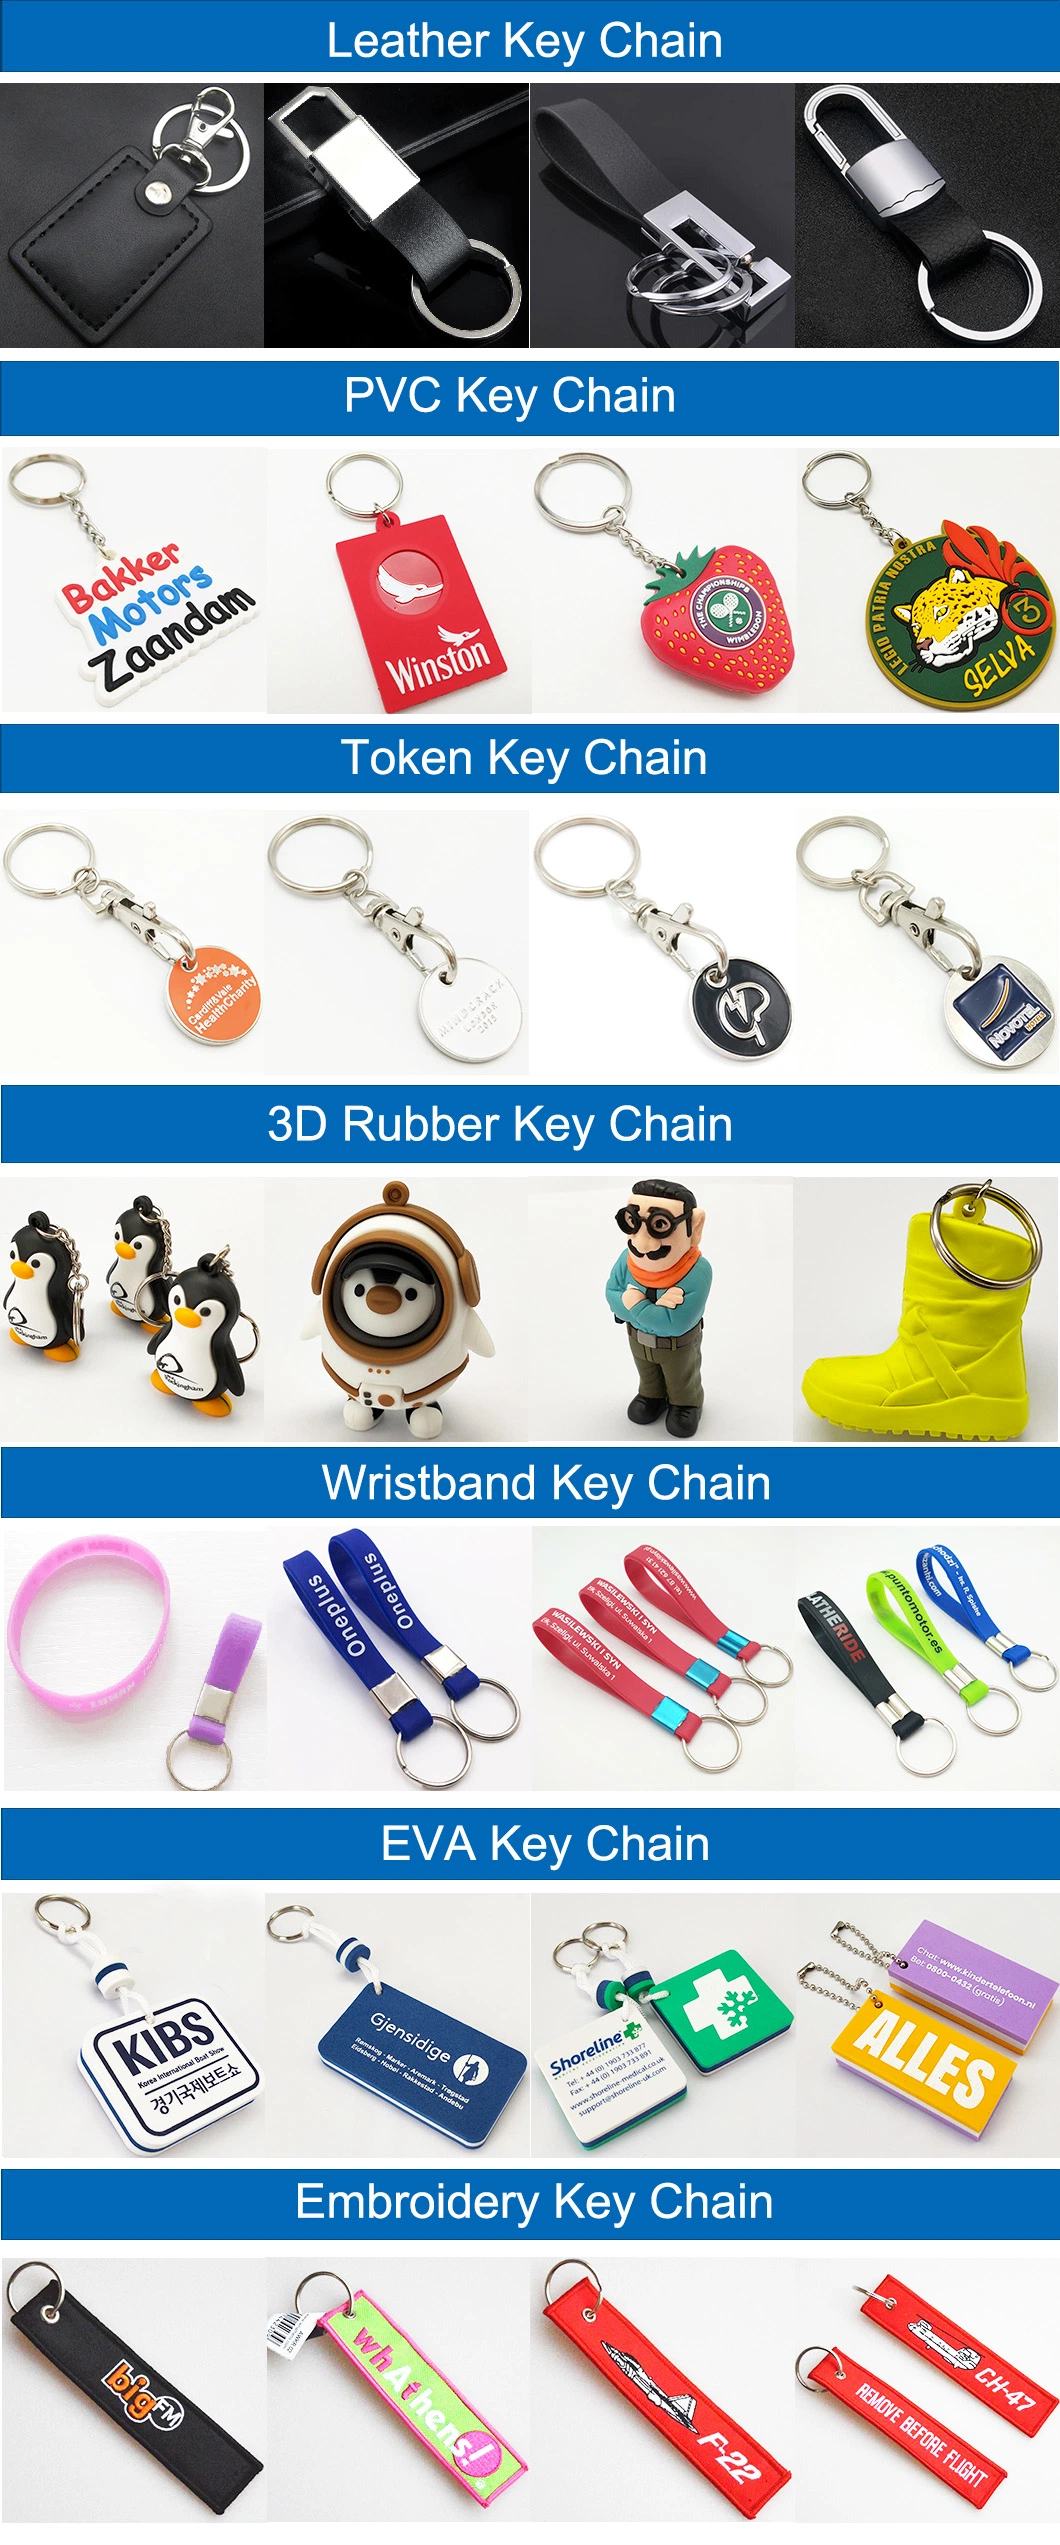 Hot Bottle Opener Coin Holder Promotional Items Custom Key Chain Metal Articles Decoration